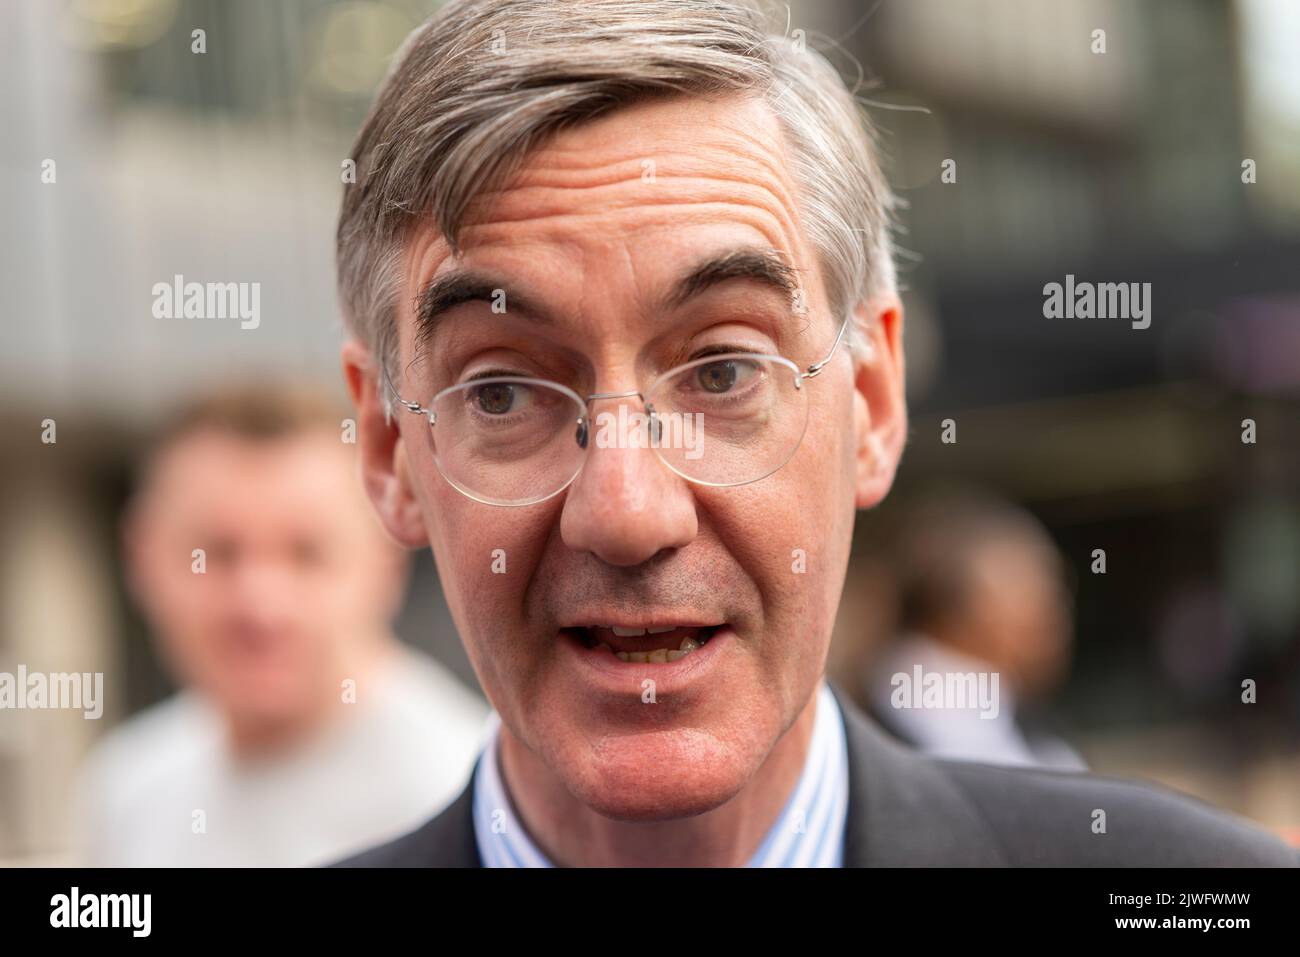 Jacob Rees-Mogg MP at the Queen Elizabeth II Centre after the Conservative party leadership announcement, London, UK. Government minister Stock Photo